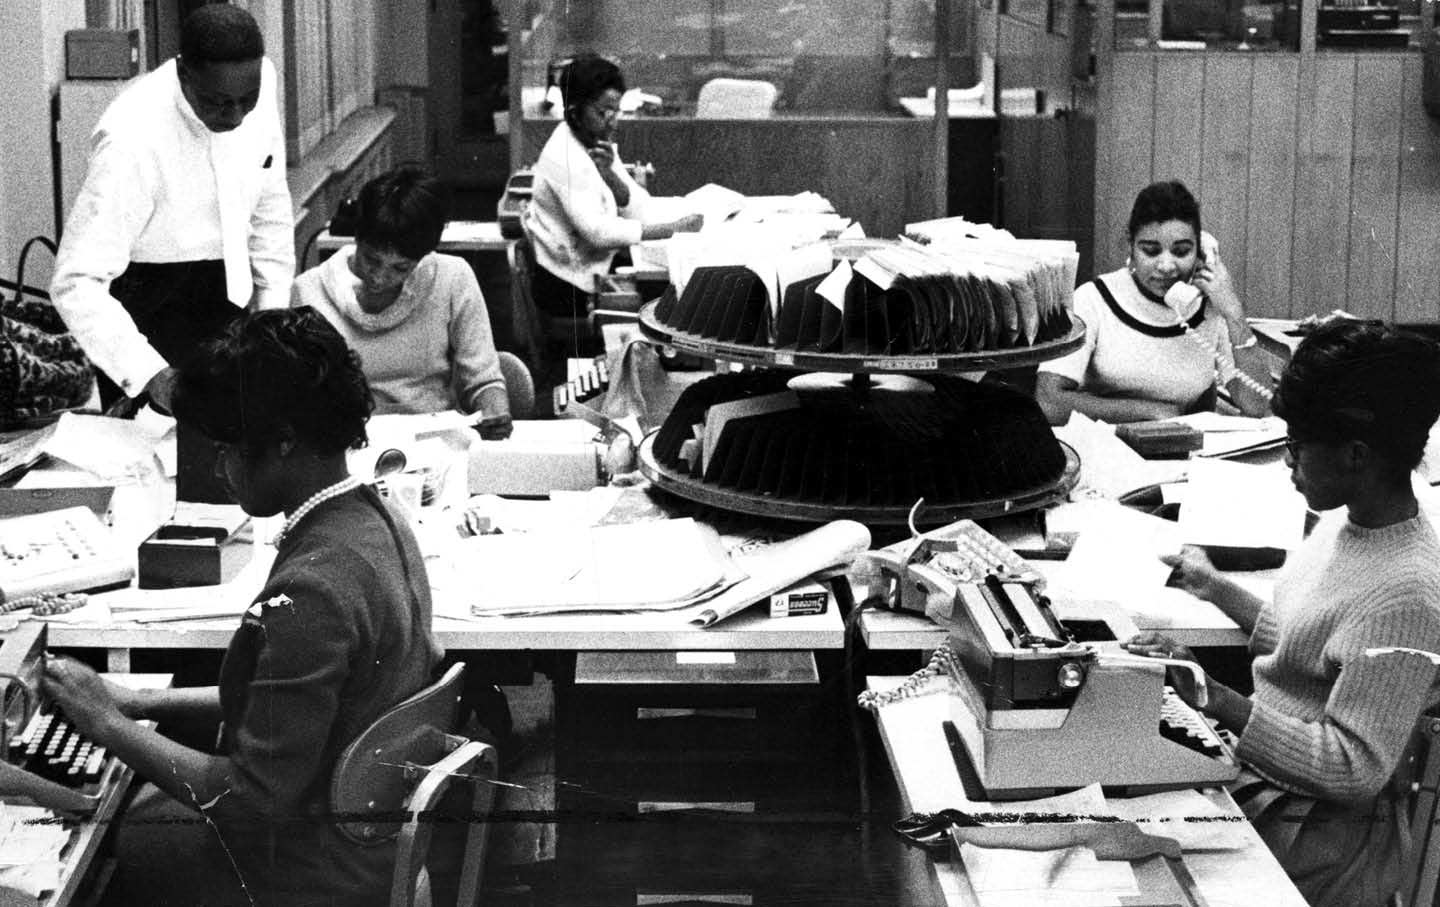 Workers at the Chicago Defender in the 1960s. The paper chronicled the Jim Crow era and the civil rights movement.